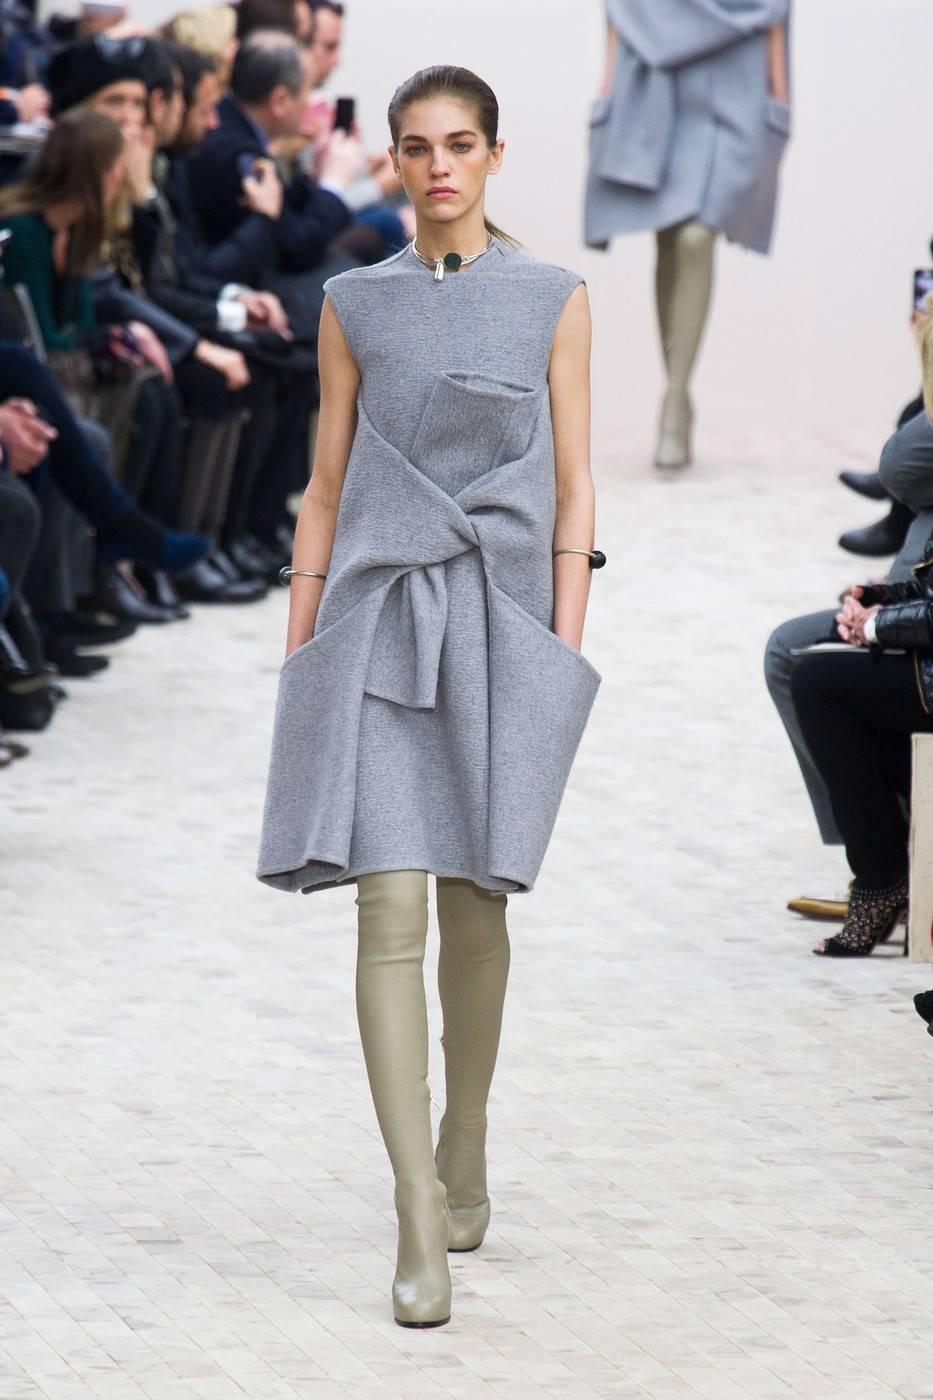 Unworn grey cashmere dress with knotted sleeve detail designed by Phoebe Philo for Celine fall 2013. French size 36 (size tag removed). Approximate measurements: Shoulder 15'', bust 32'', waist 28'', hip 36'' and length 42''. Double-faced cashmere.